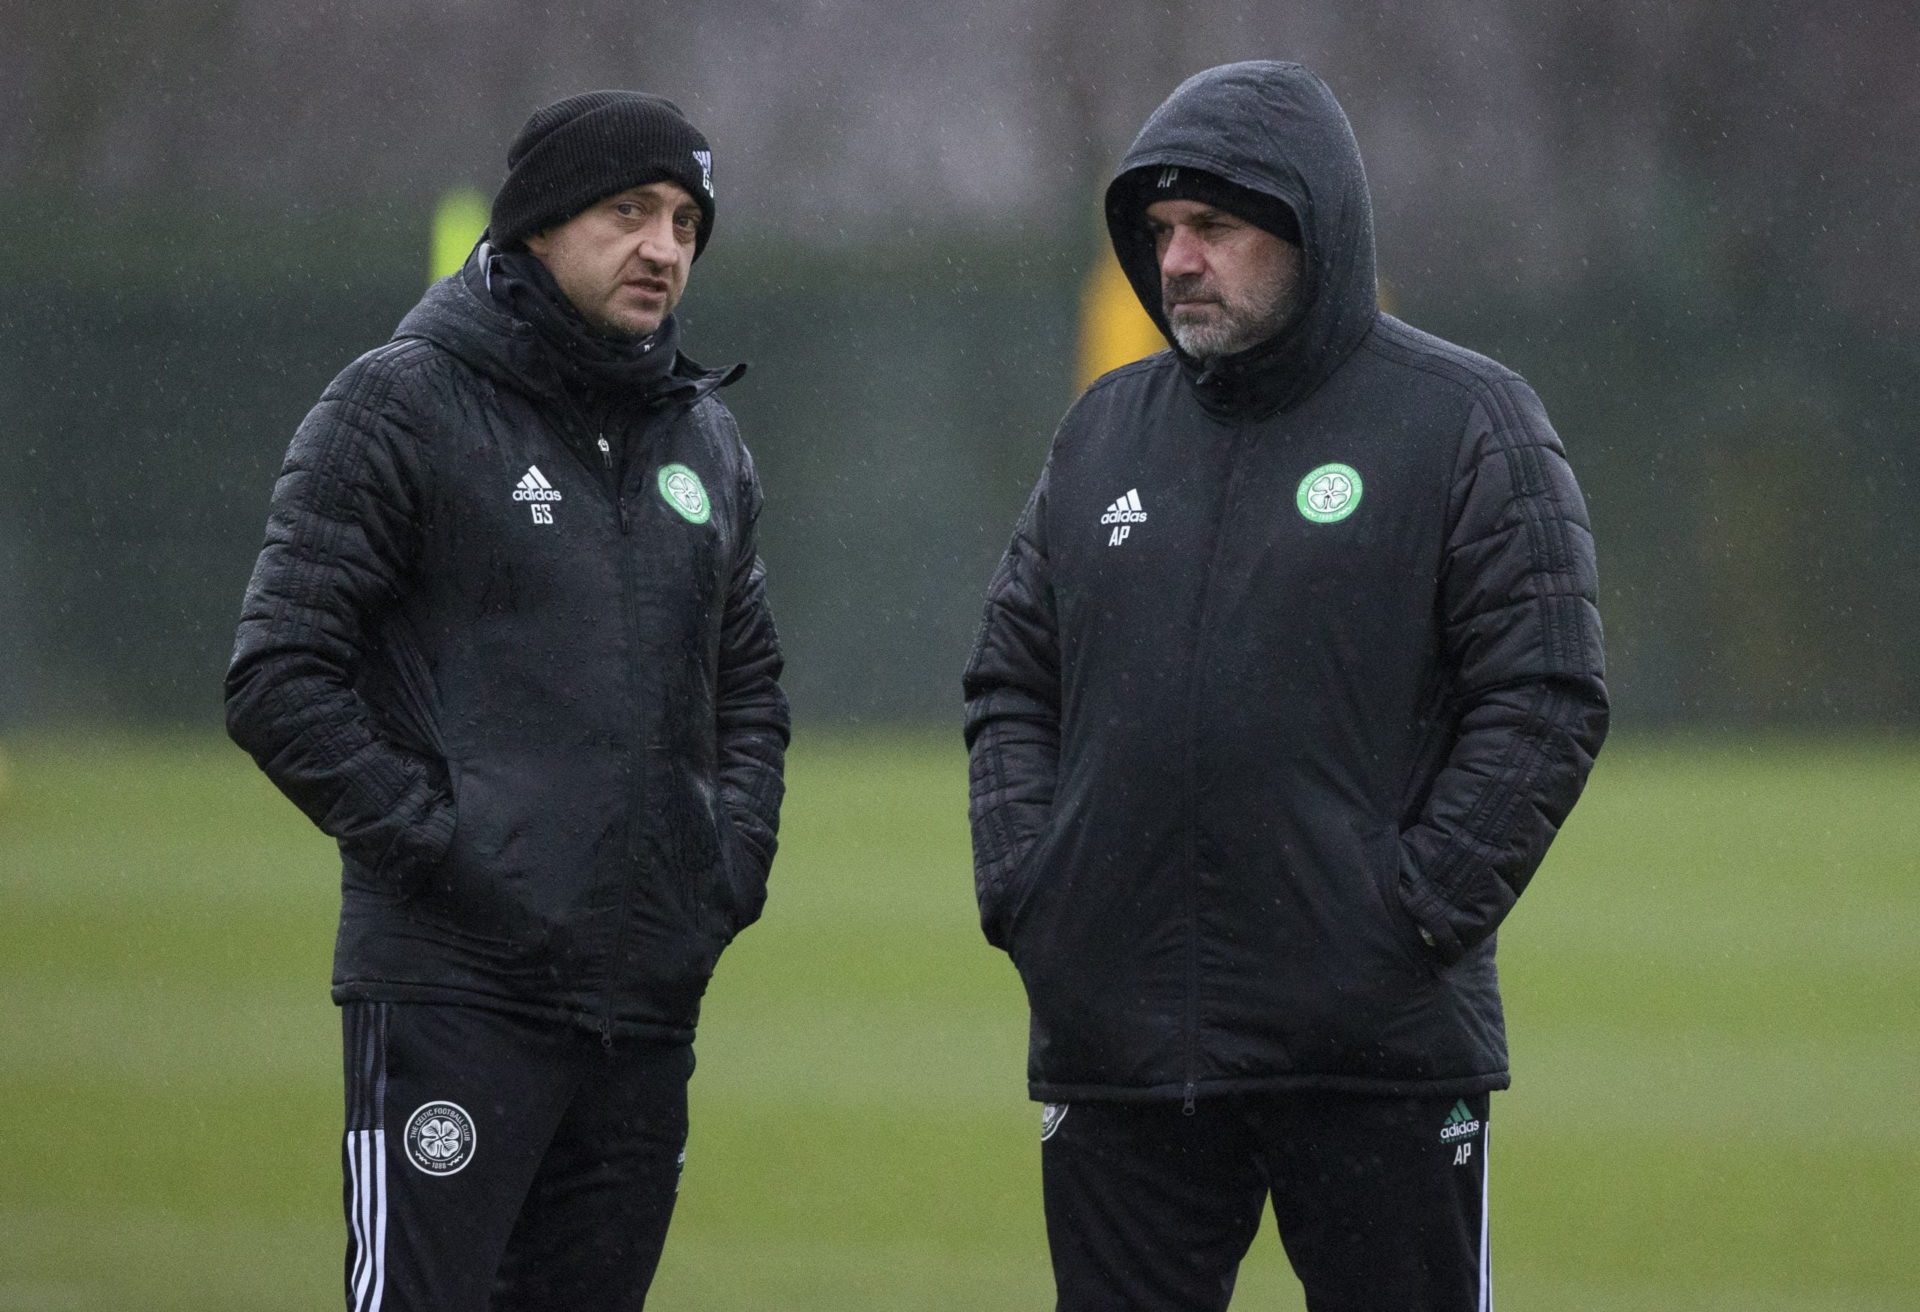 Alison McConnell: Postecoglou has turned Celtic perceptions on their head